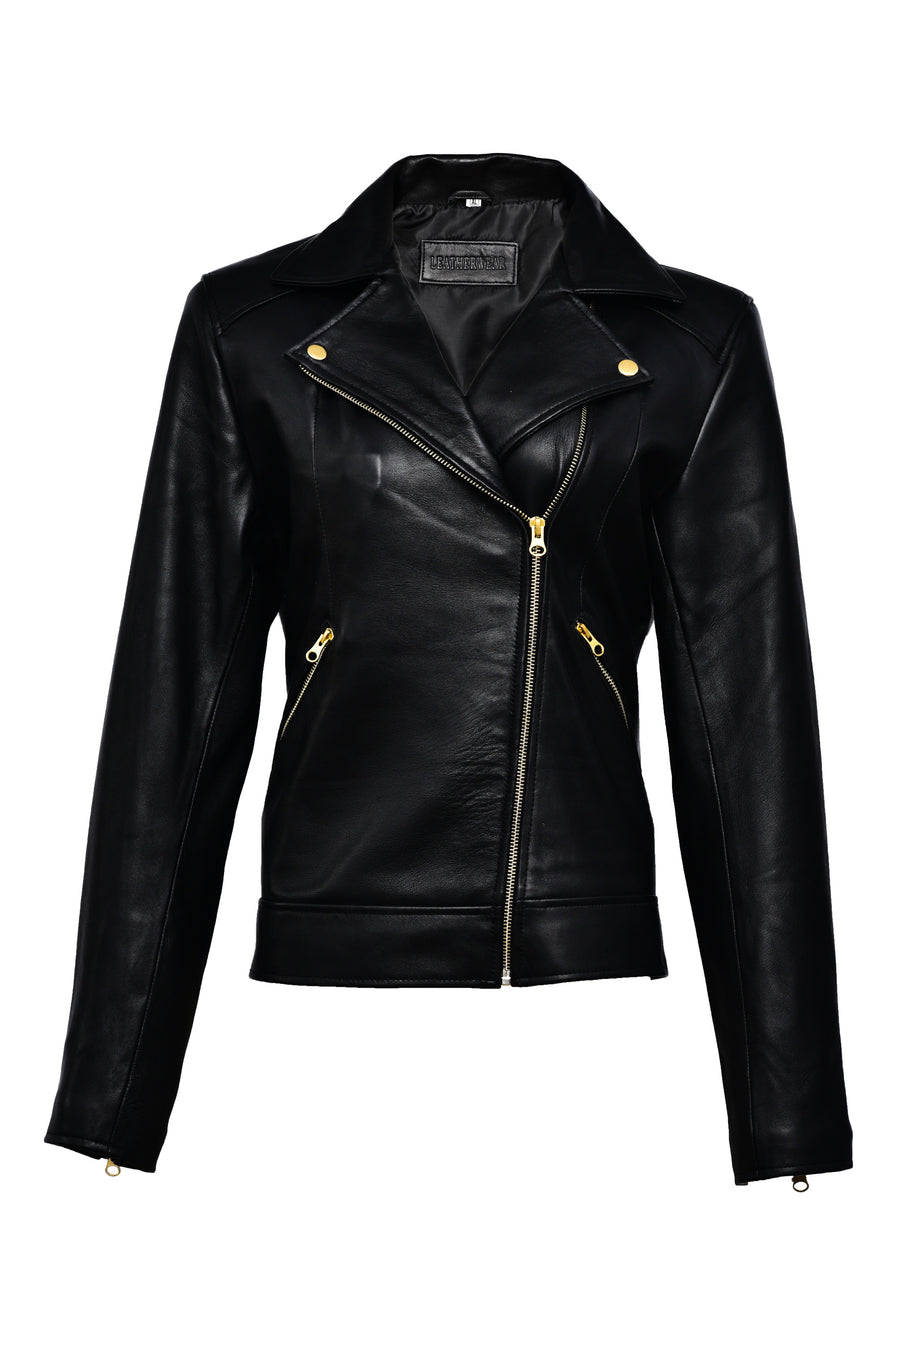 Leather Biker Jacket for Women Collection | Leatherwear